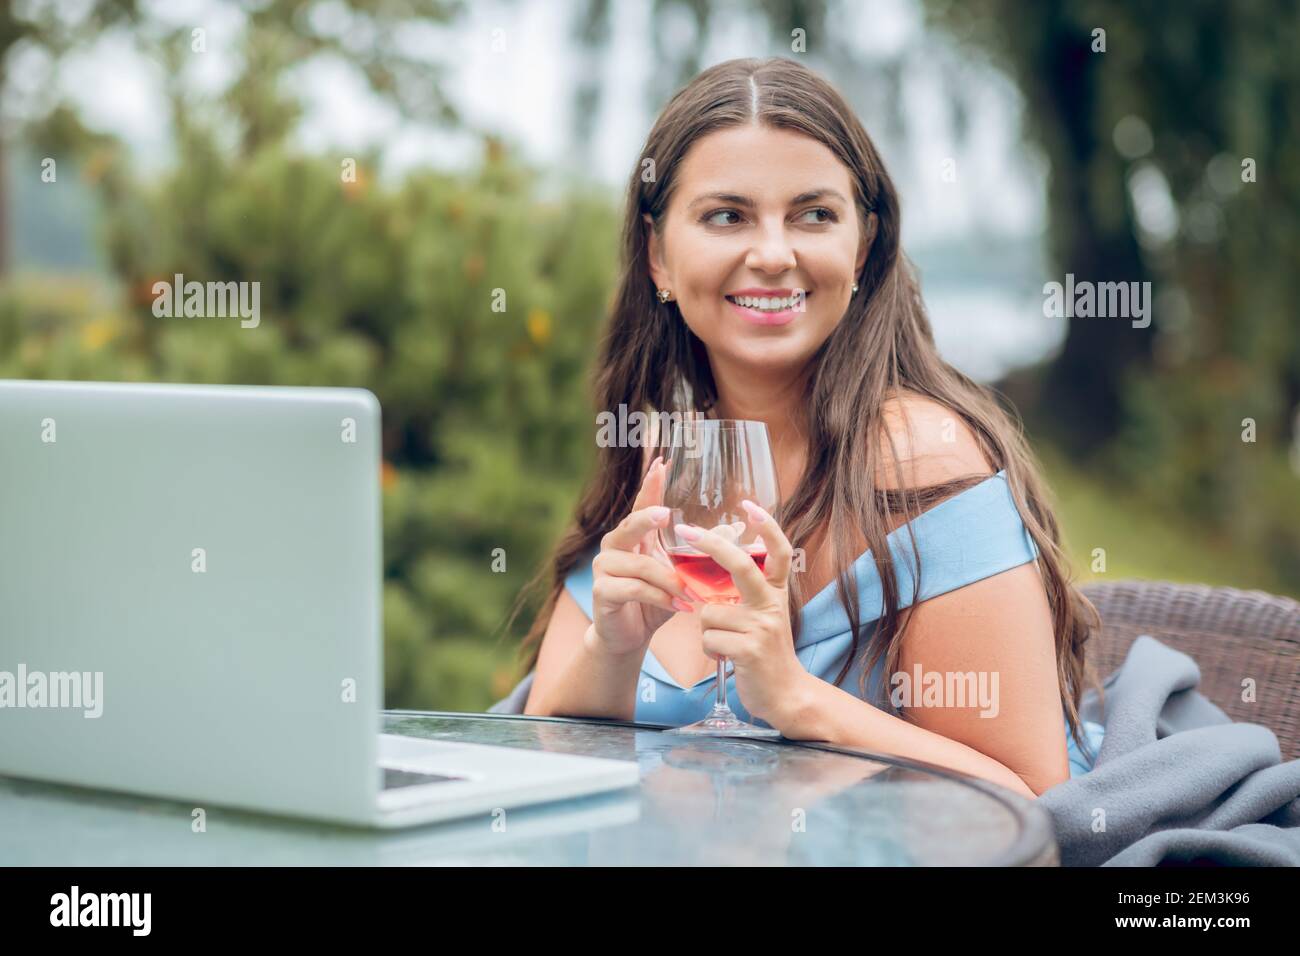 Woman with glass near laptop in dreamy mood Stock Photo